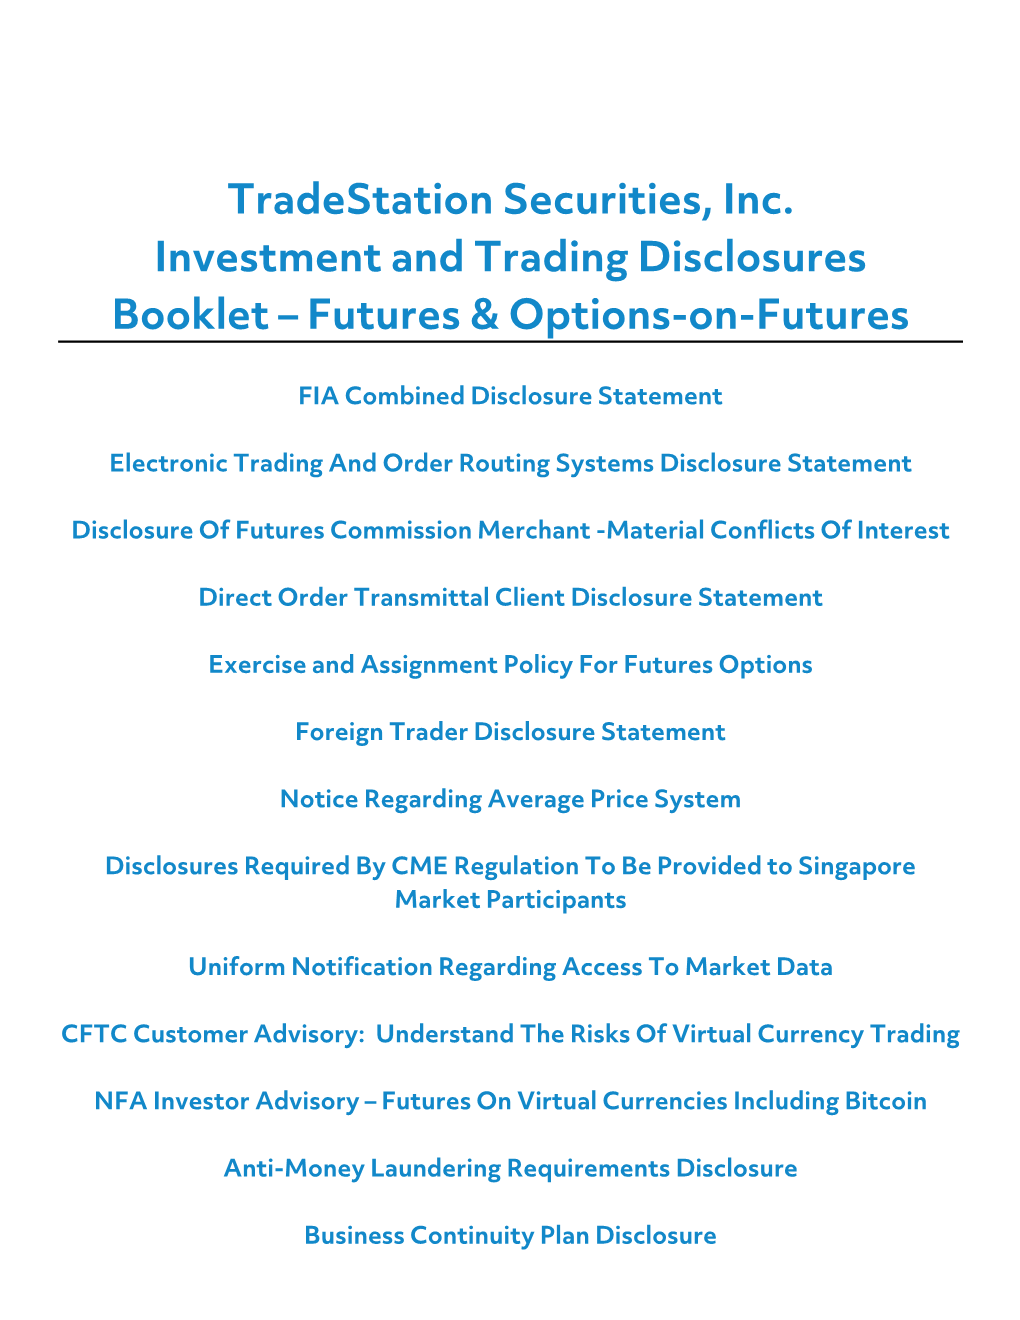 Tradestation Securities, Inc. Investment and Trading Disclosures Booklet – Futures & Options-On-Futures